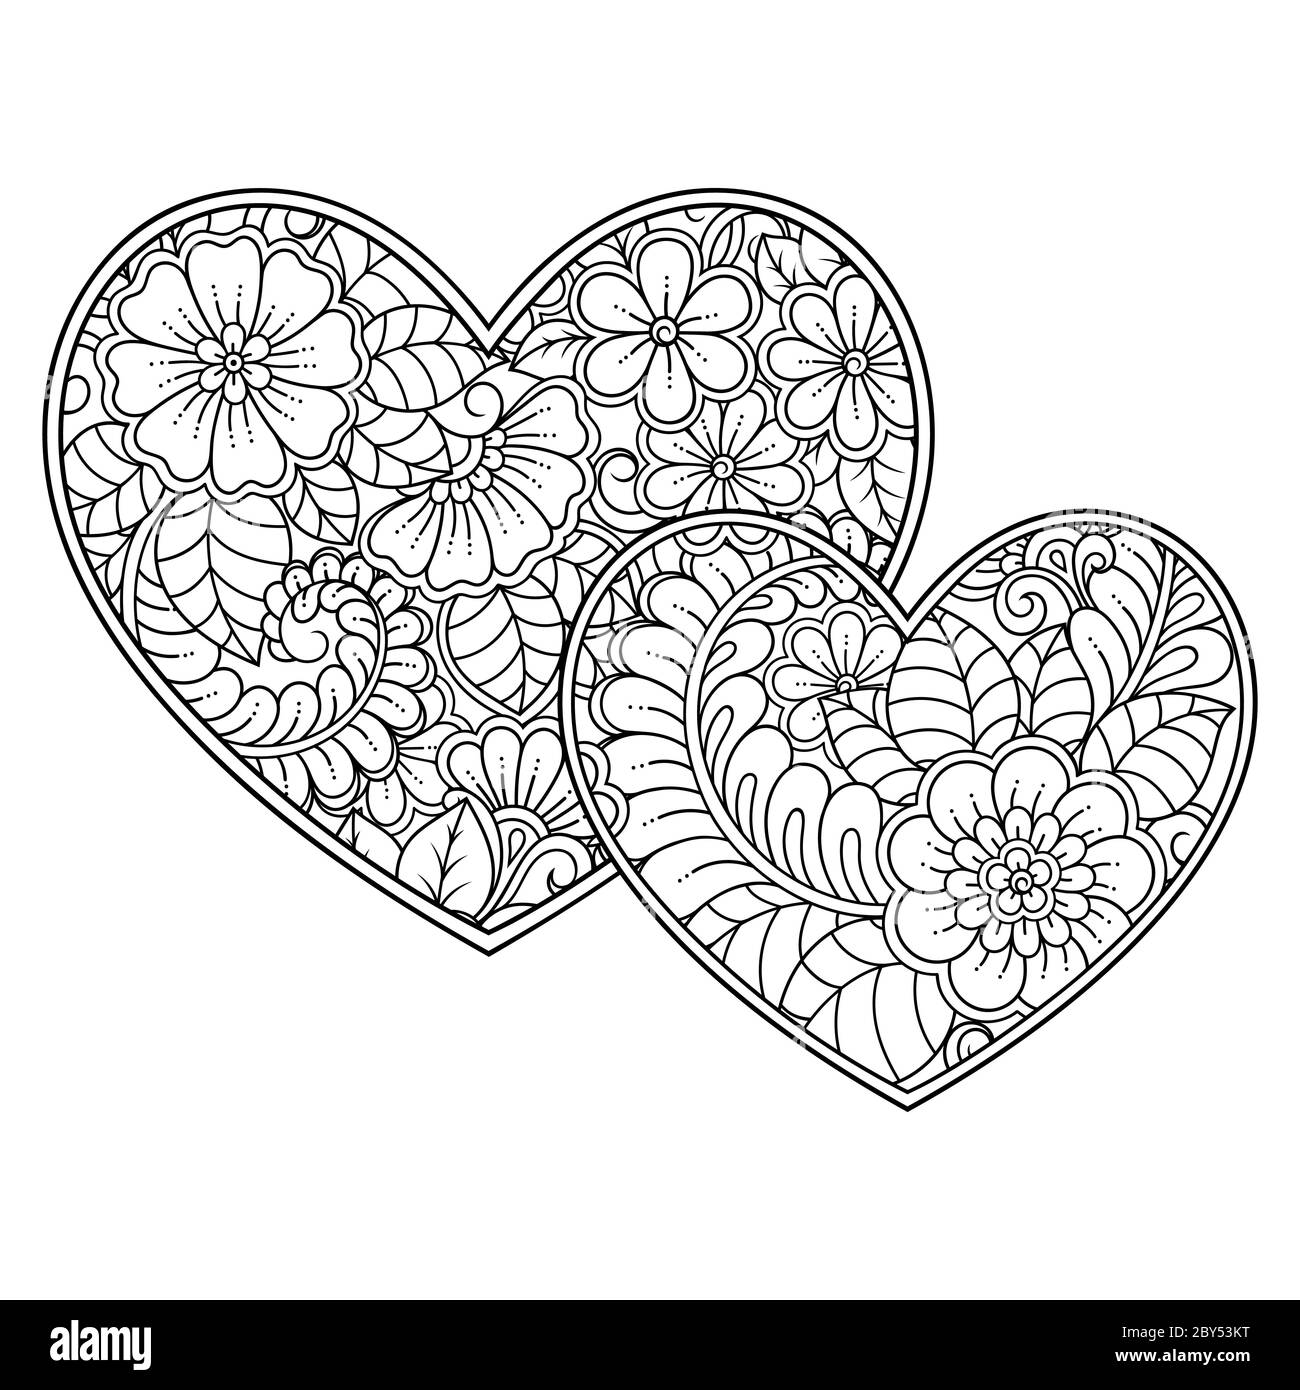 Mehndi flower pattern in form of heart for Henna drawing and tattoo. Decoration in ethnic oriental, Indian style. Valentine's day greetings. Coloring Stock Vector